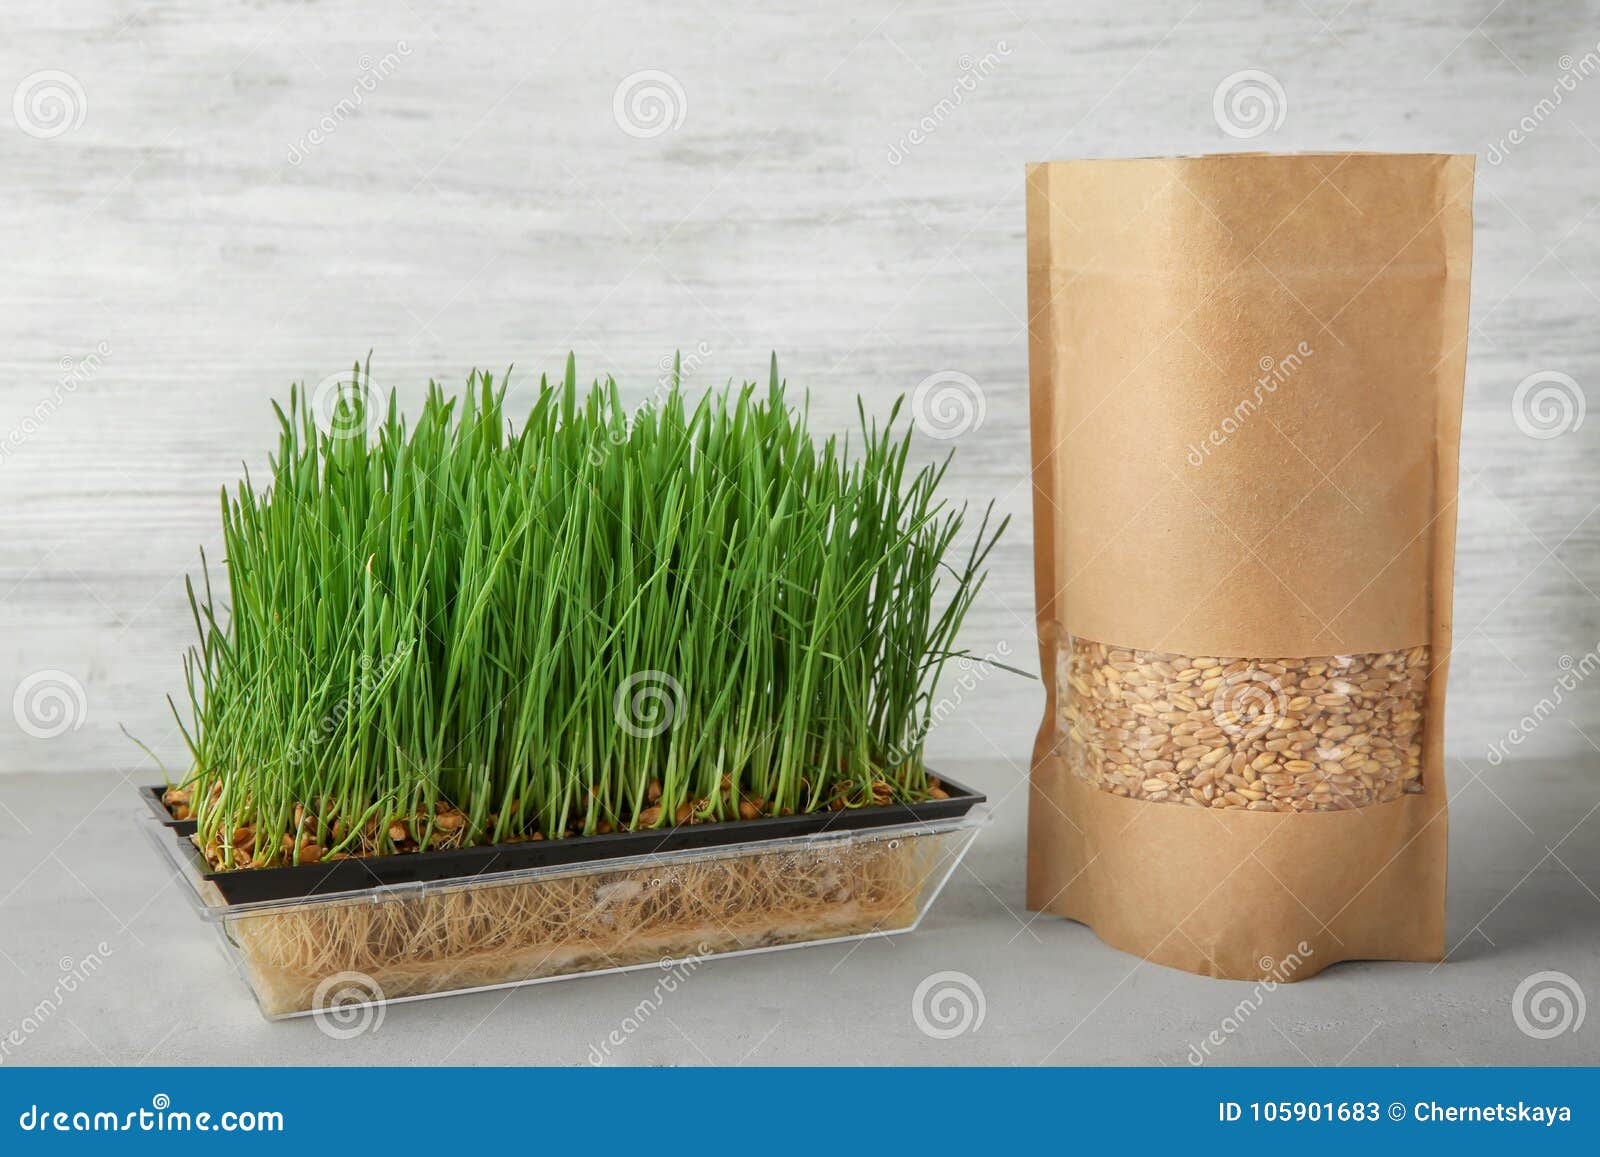 800X Organic Wheatgrass Wheat Grass Seeds For Sprouting Pets Health